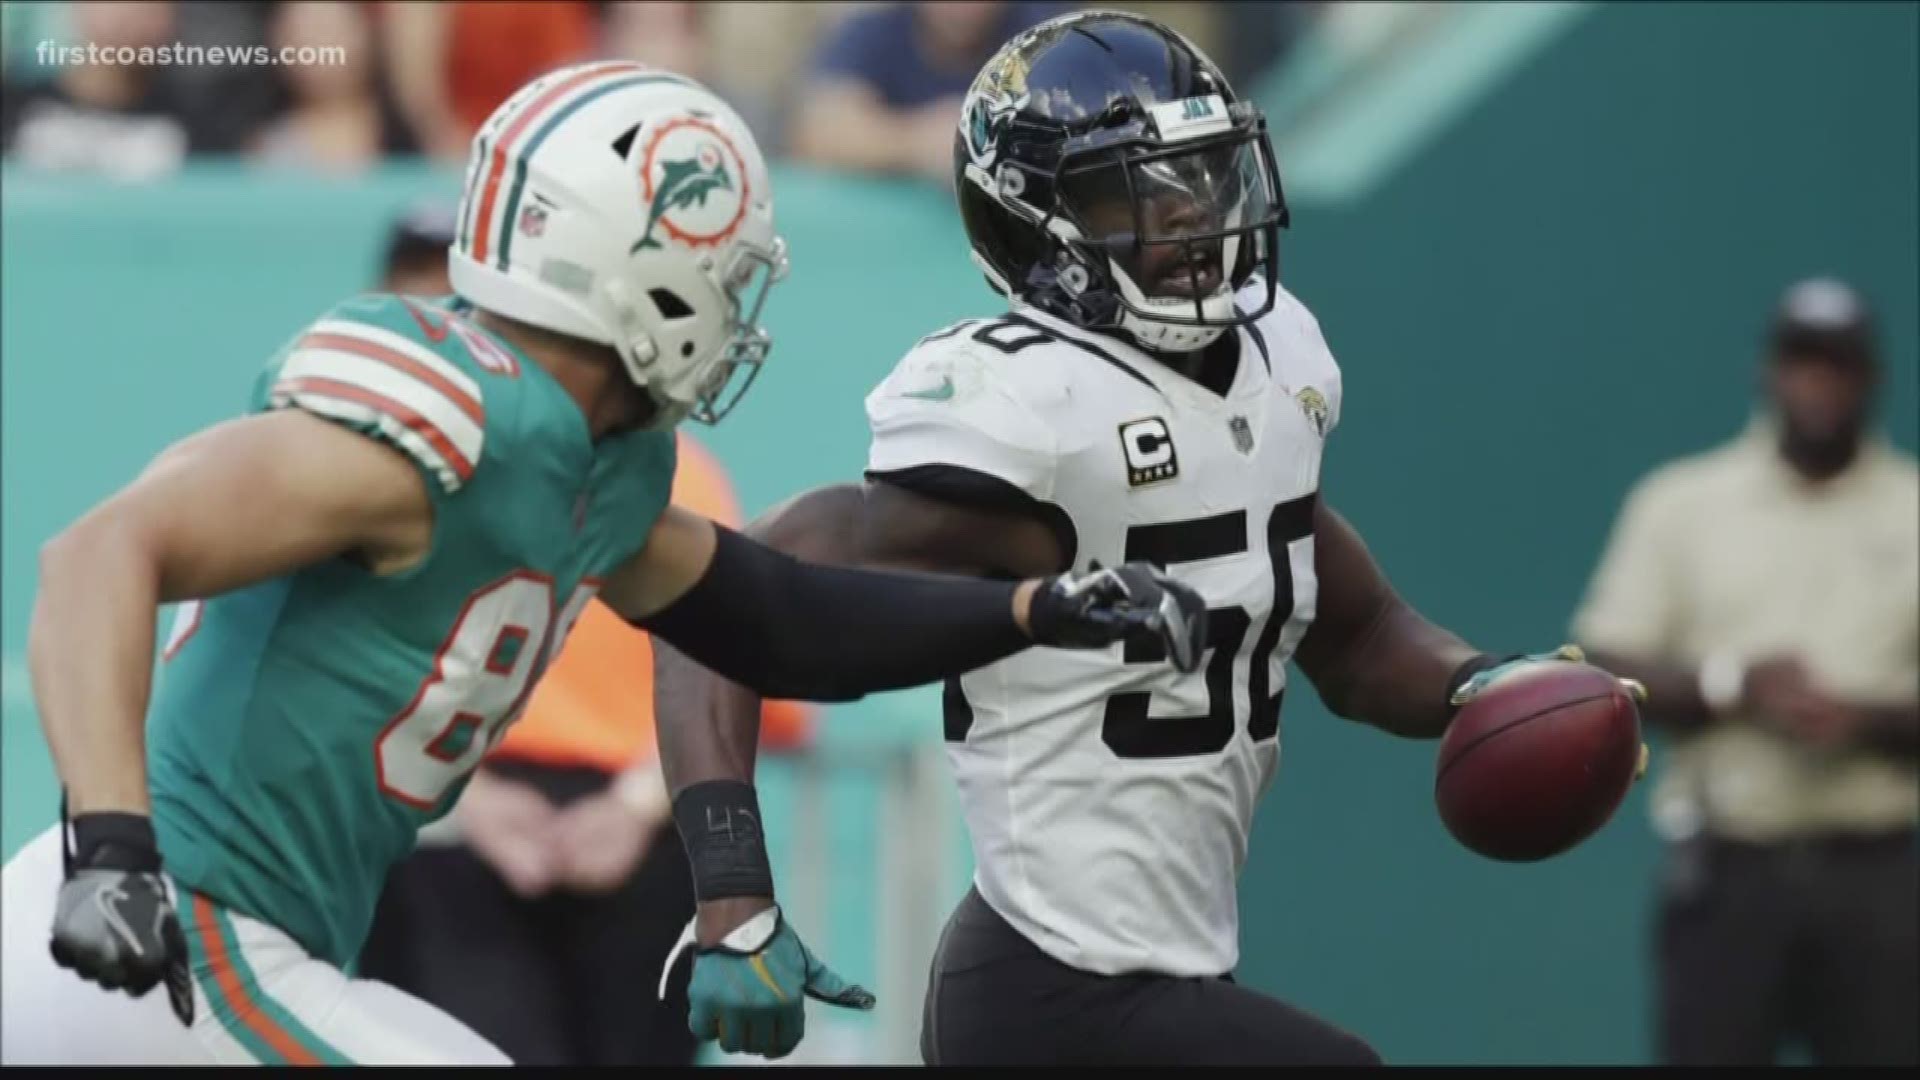 The Jacksonville Sheriff's Office confirmed police were called to the home of former Jaguars player Telvin Smith.